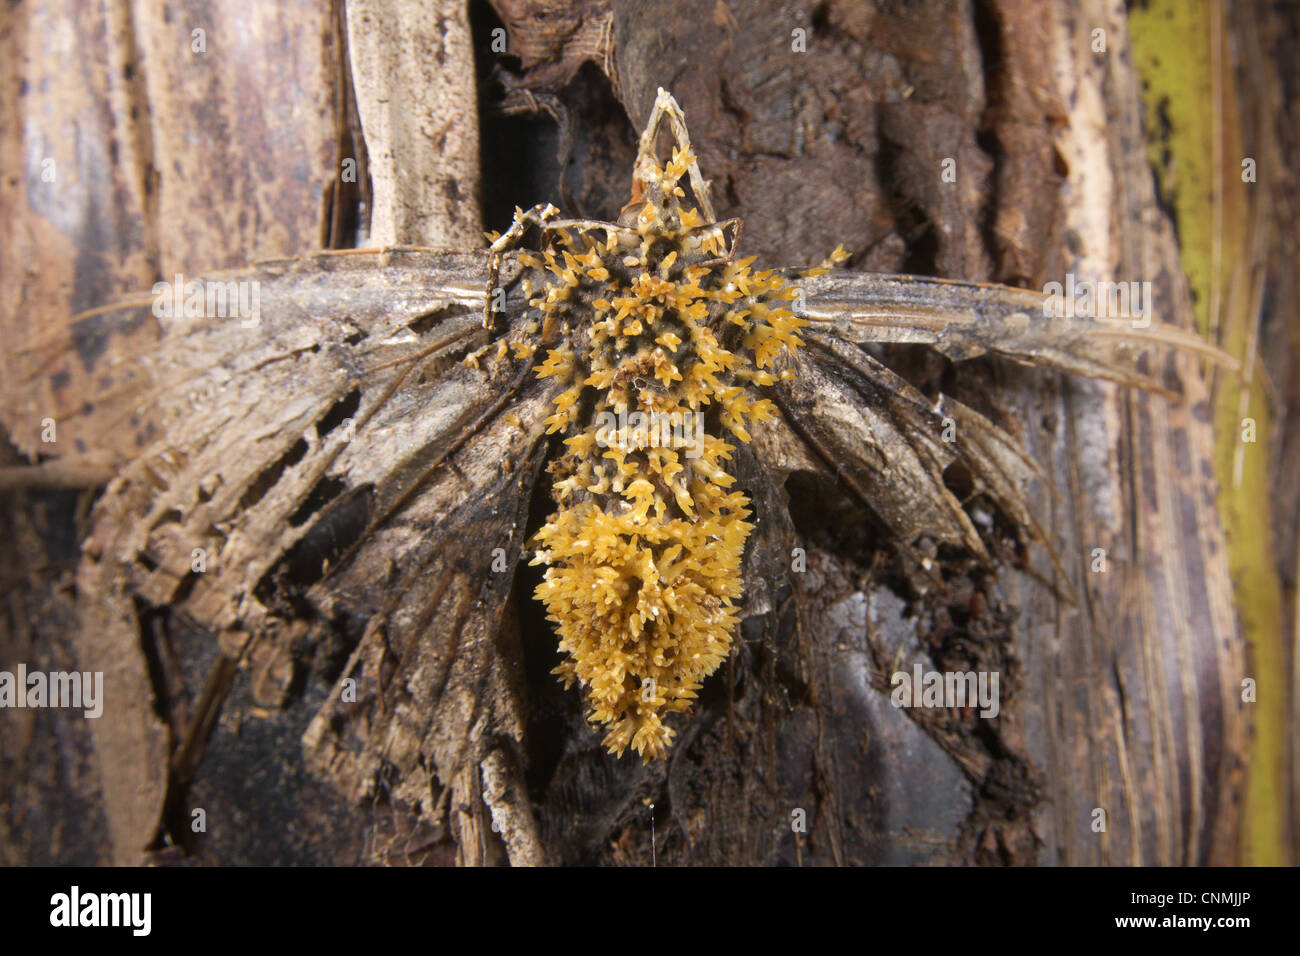 Sac Fungus (Cordyceps sp.) fruiting bodies, emerging from dead parasitized butterfly, Manu Road, Departemento Cuzco, Andes, Peru Stock Photo